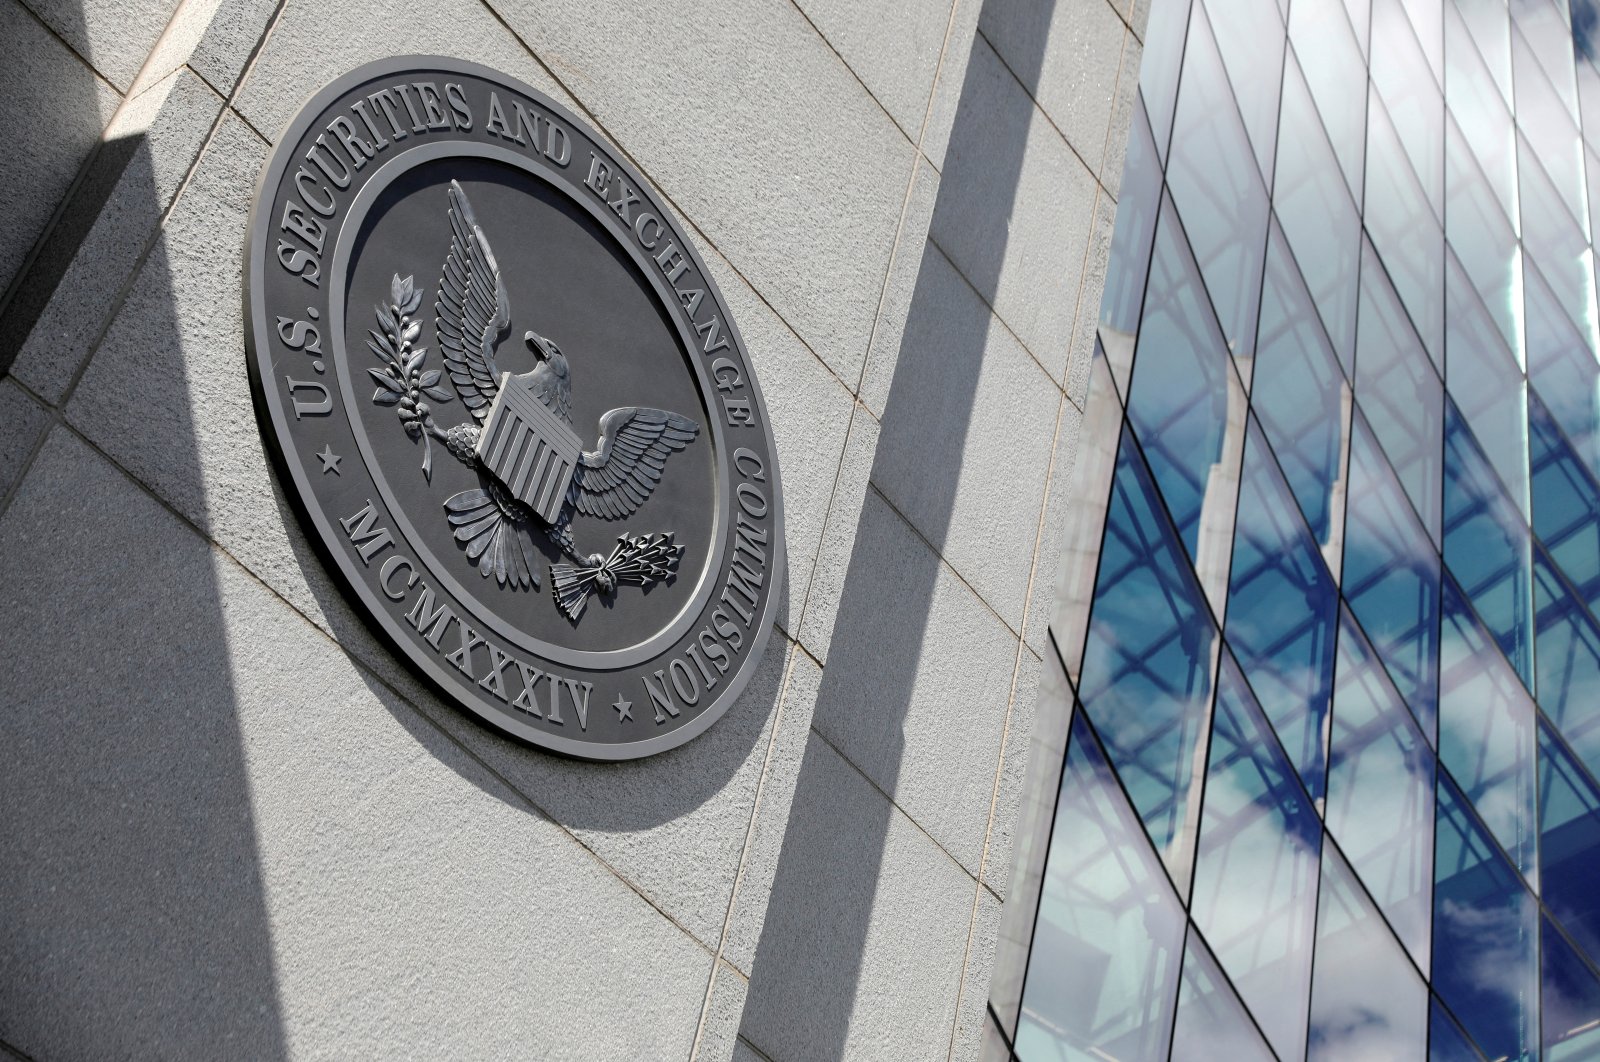 SEC denies bitcoin ETF approval claim after X account hack